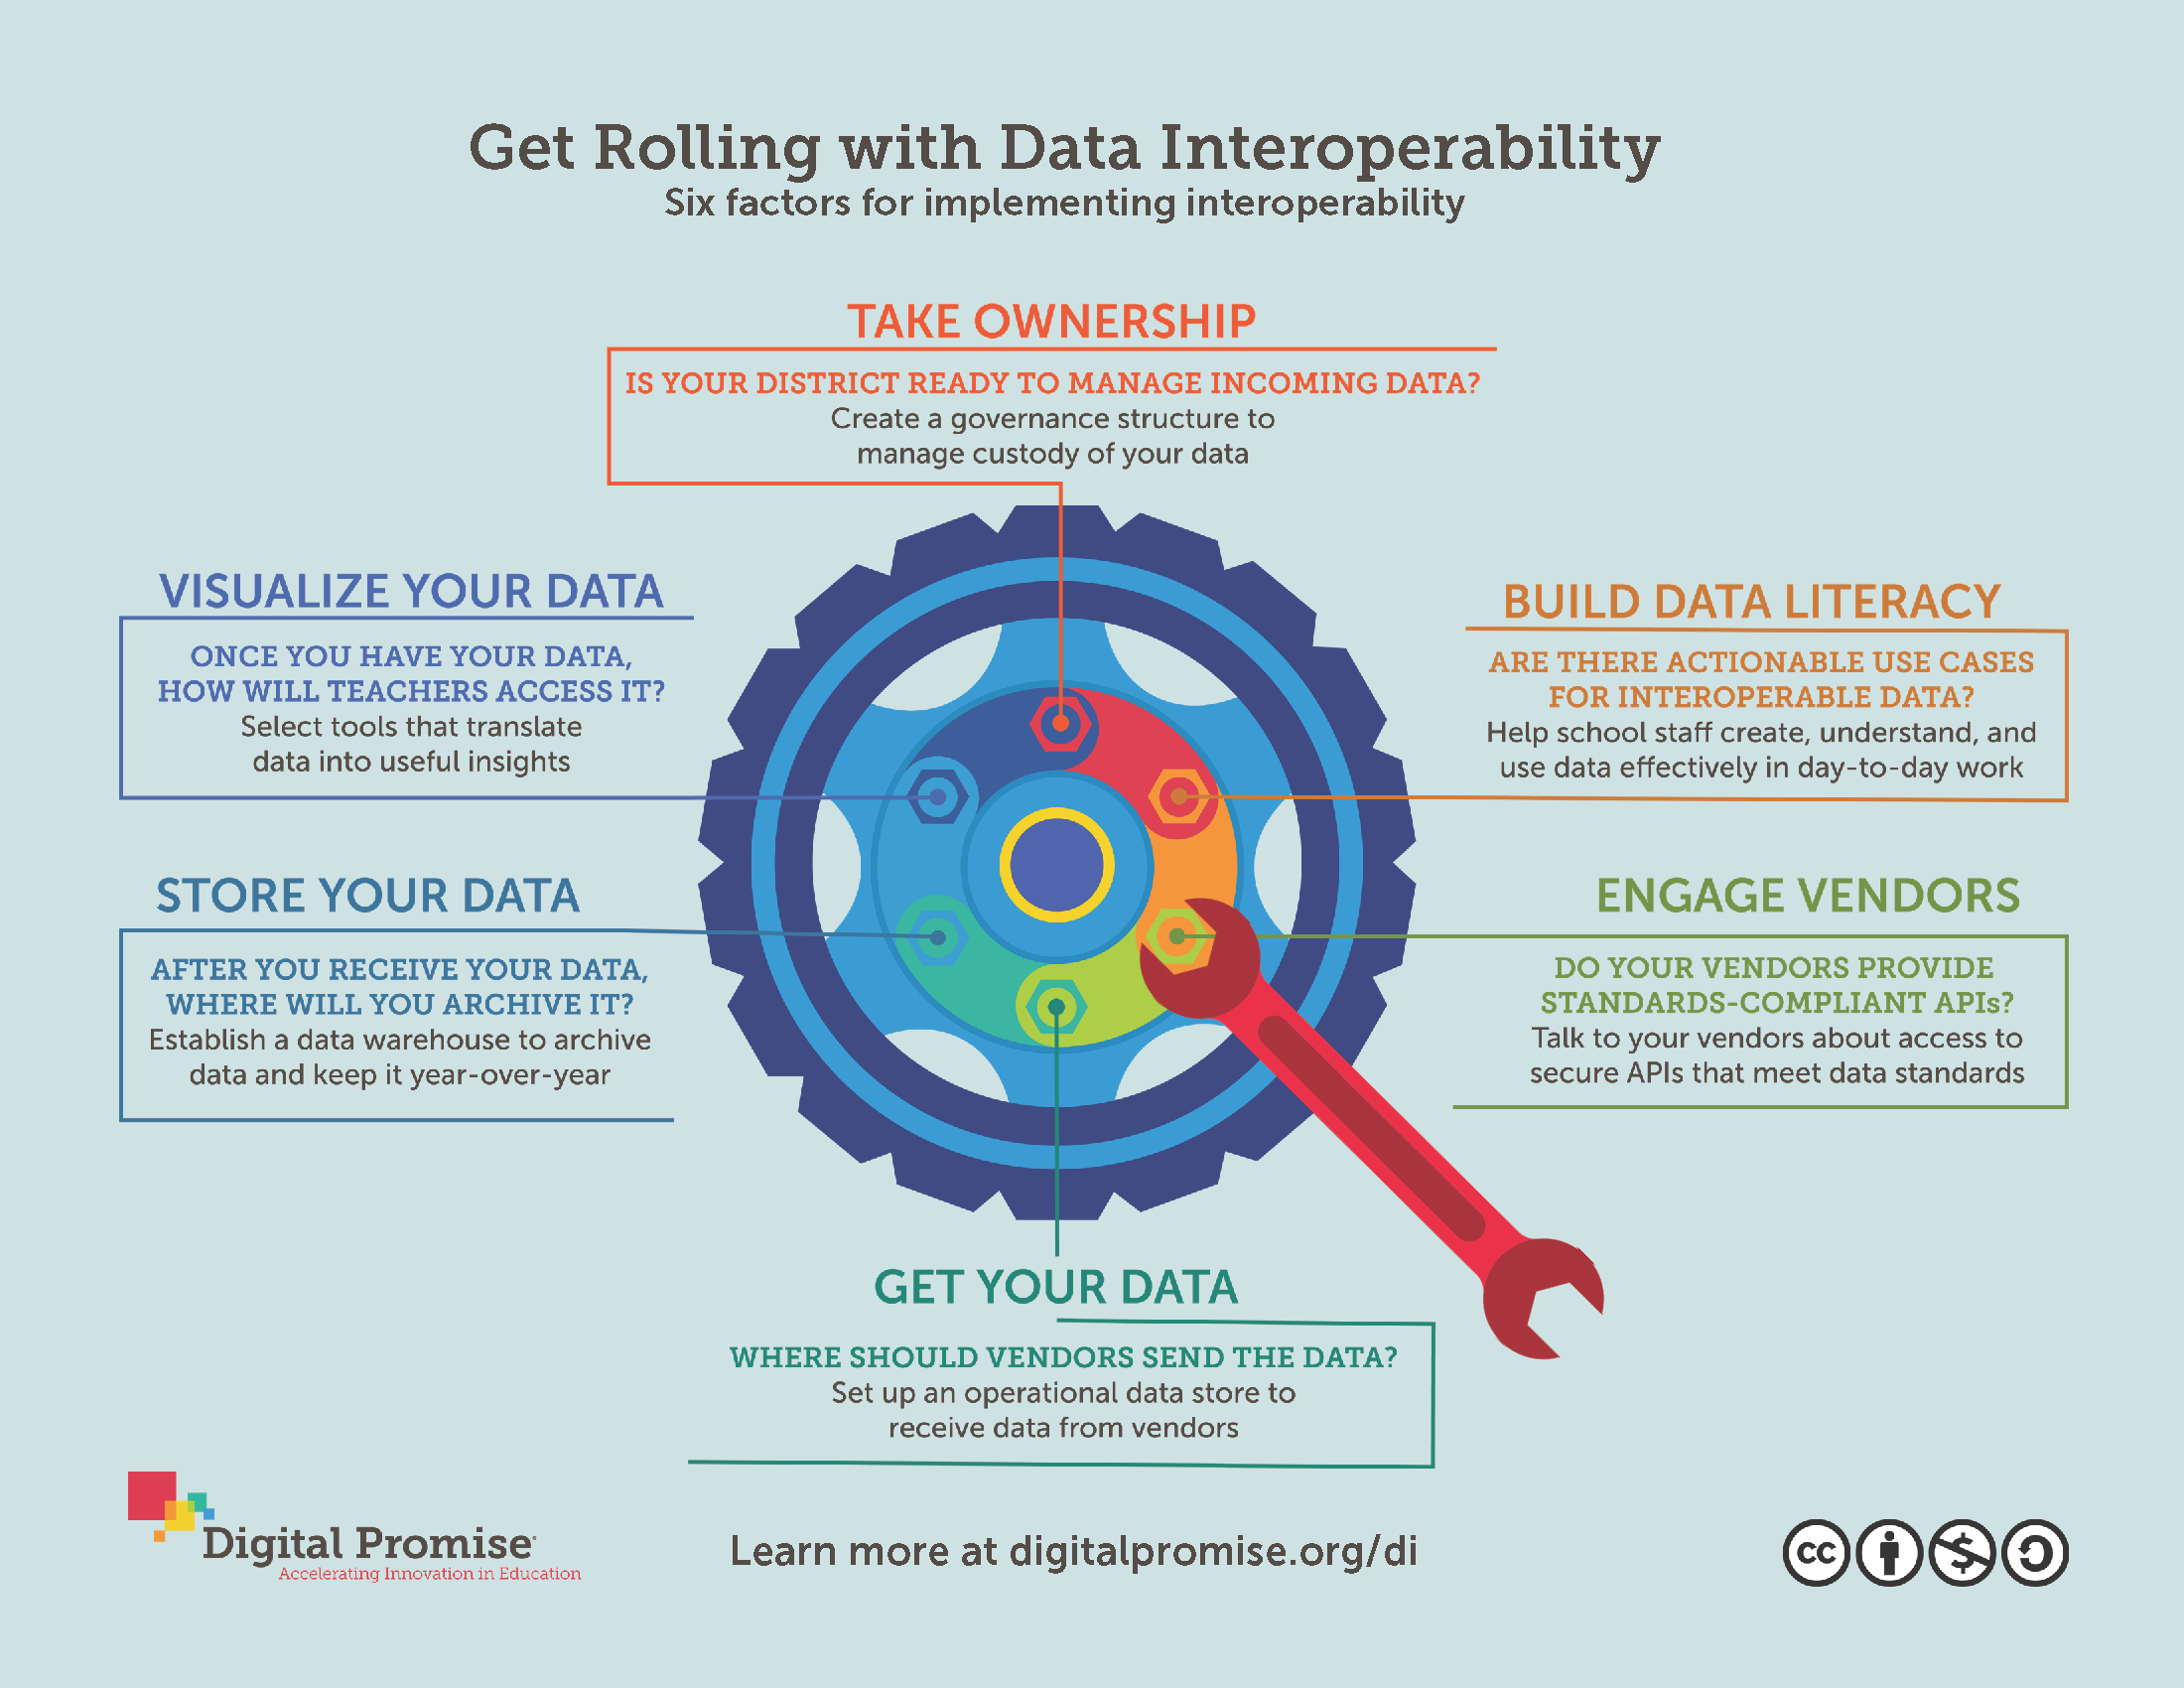 Illustration of the Get Rolling with Data Interoperability diagram